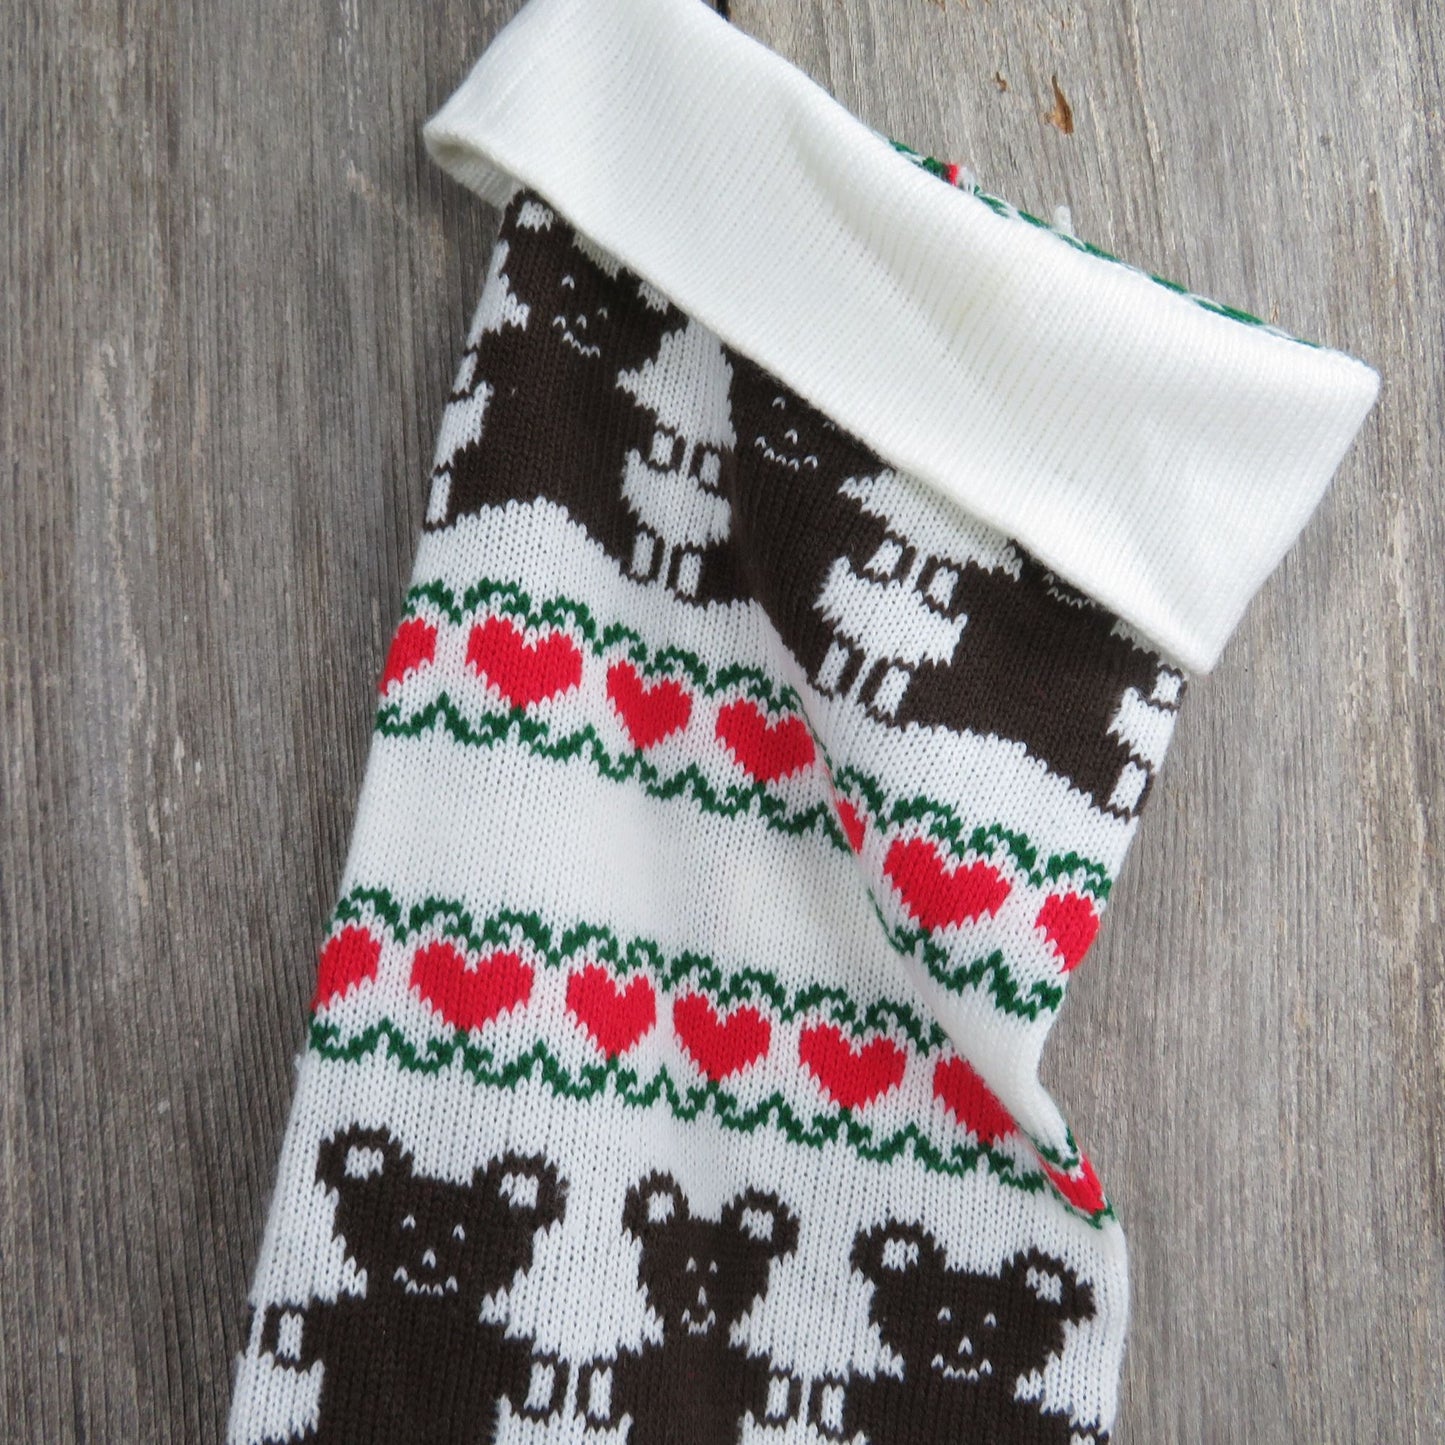 Vintage Teddy Bear Knit Stocking Extra Large White Sweater Red Green St376